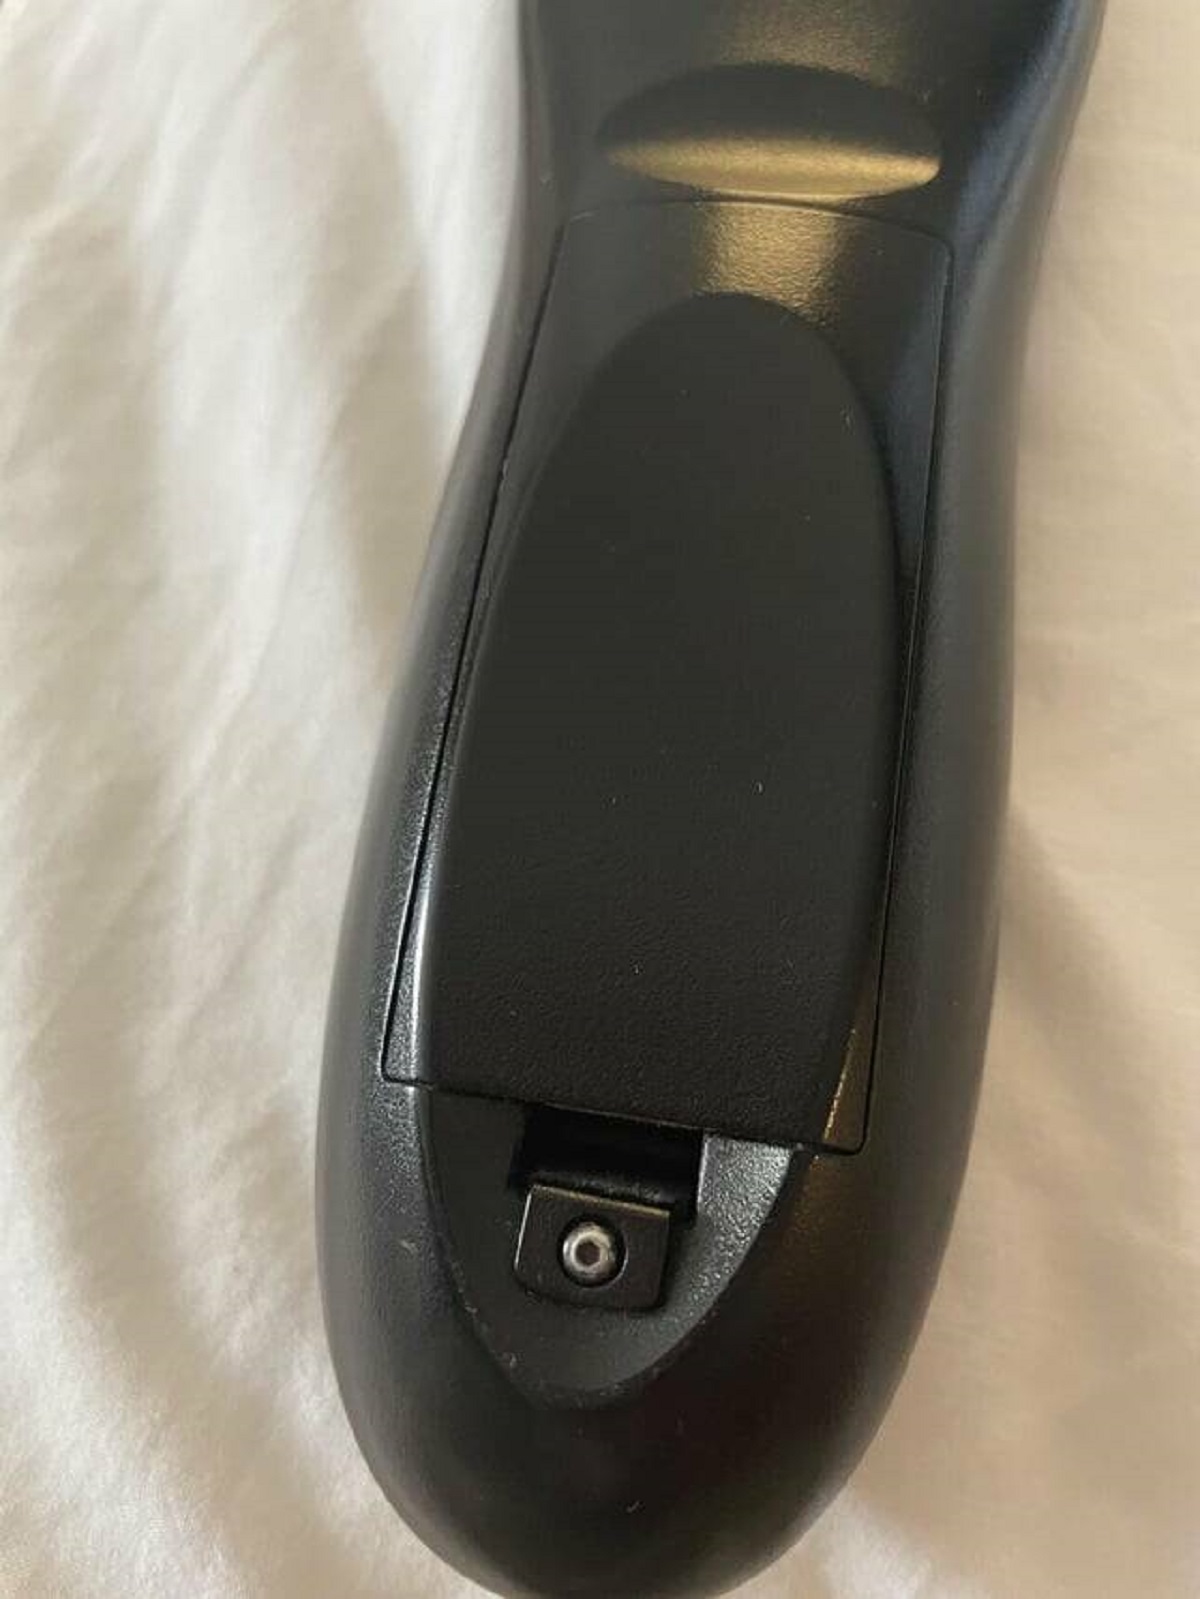 "Hotel TV remote has a hex screw locking the battery cover"